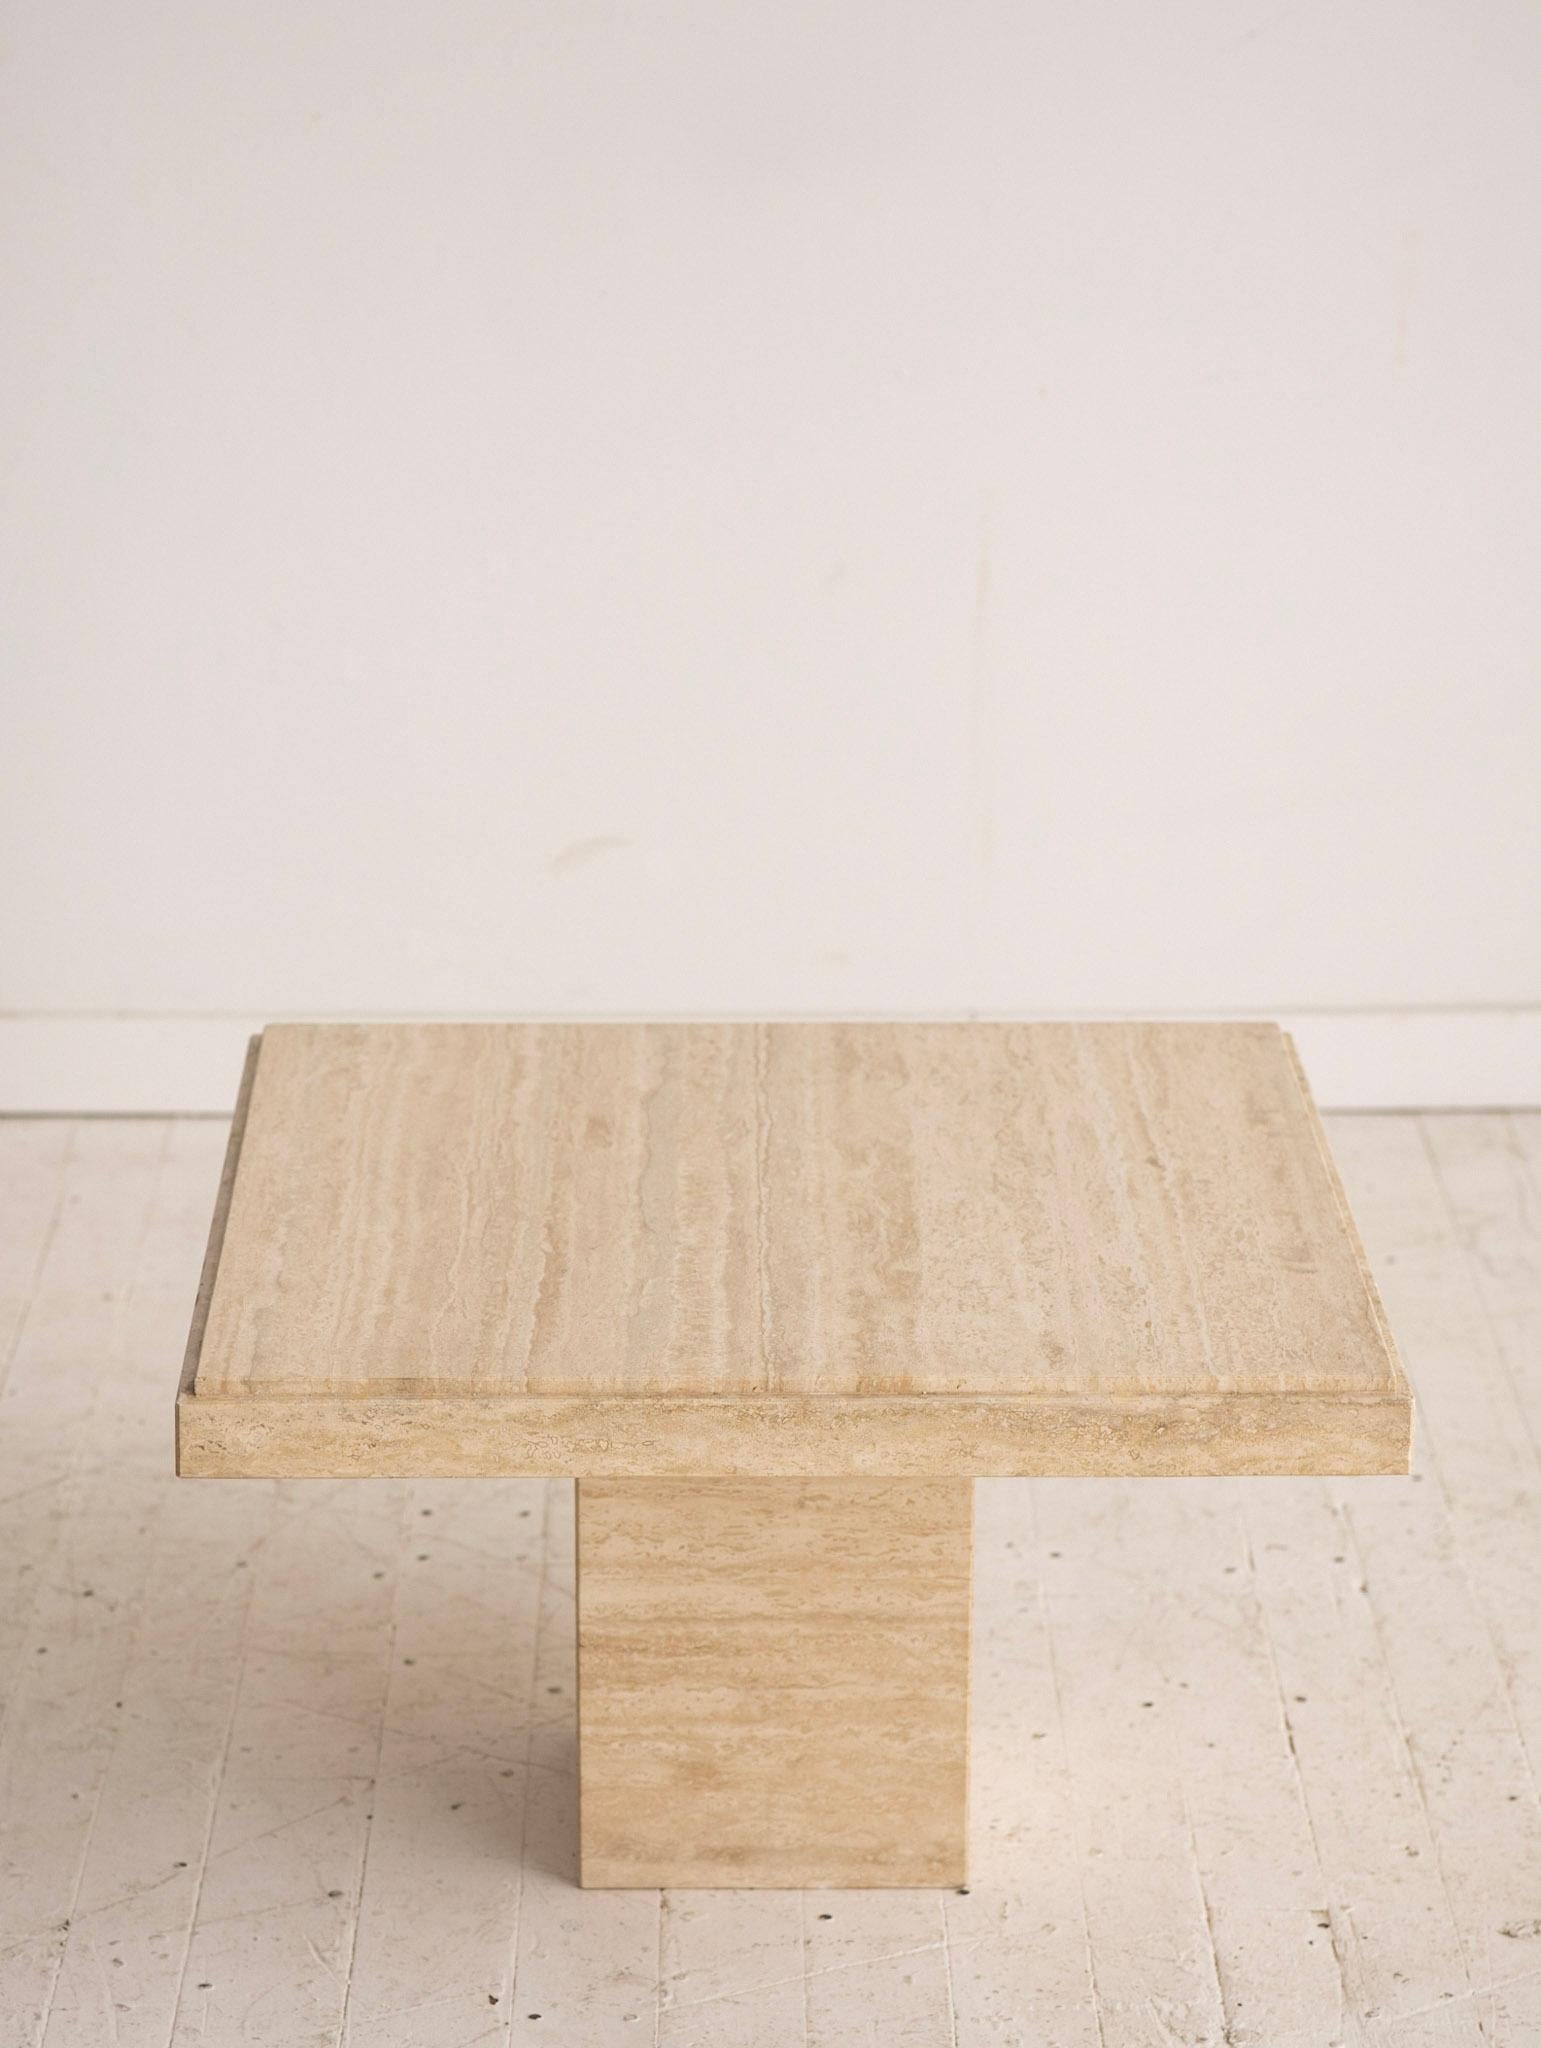 1980s square Italian travertine side table. Square travertine slab rests on hollow monolith base.